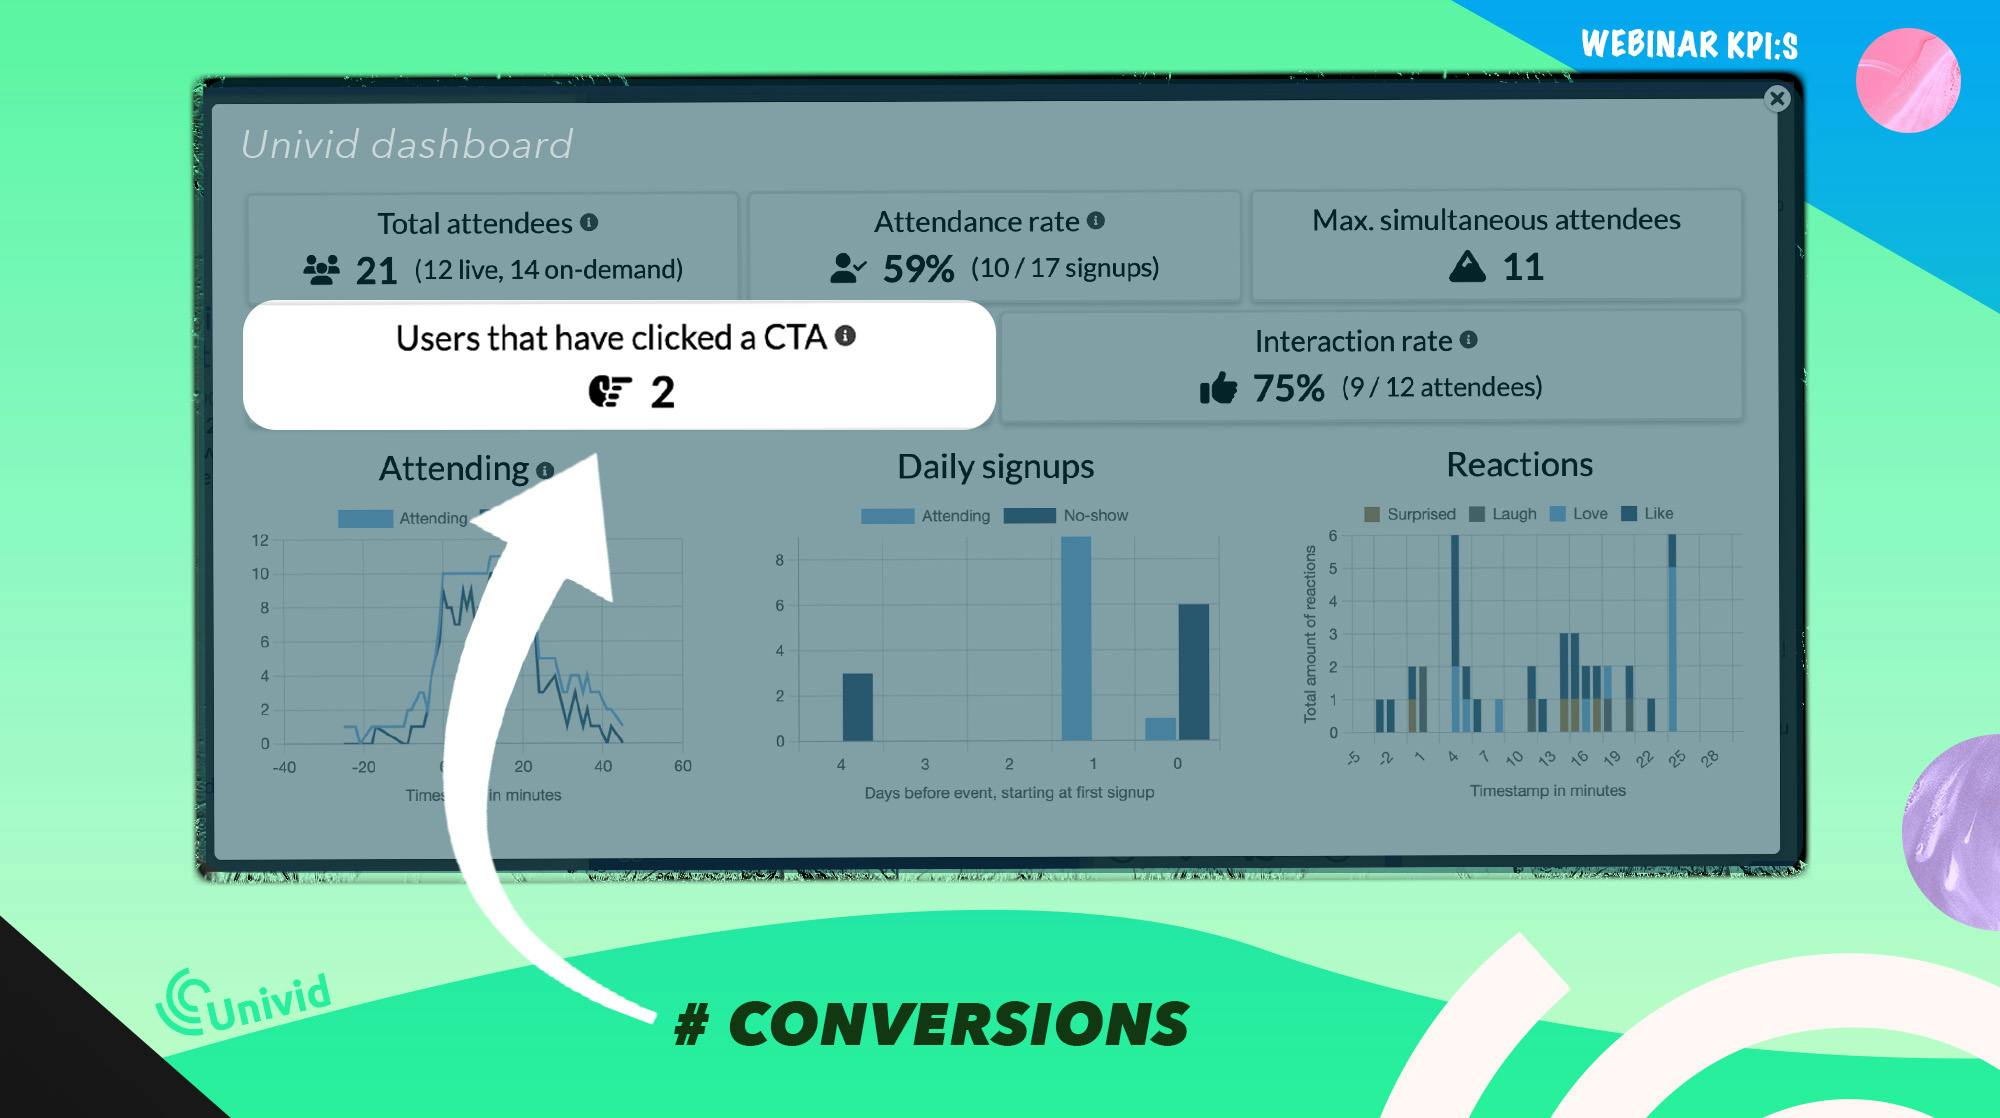 Number of conversions (ROI) from your webinar - Webinar KPIs